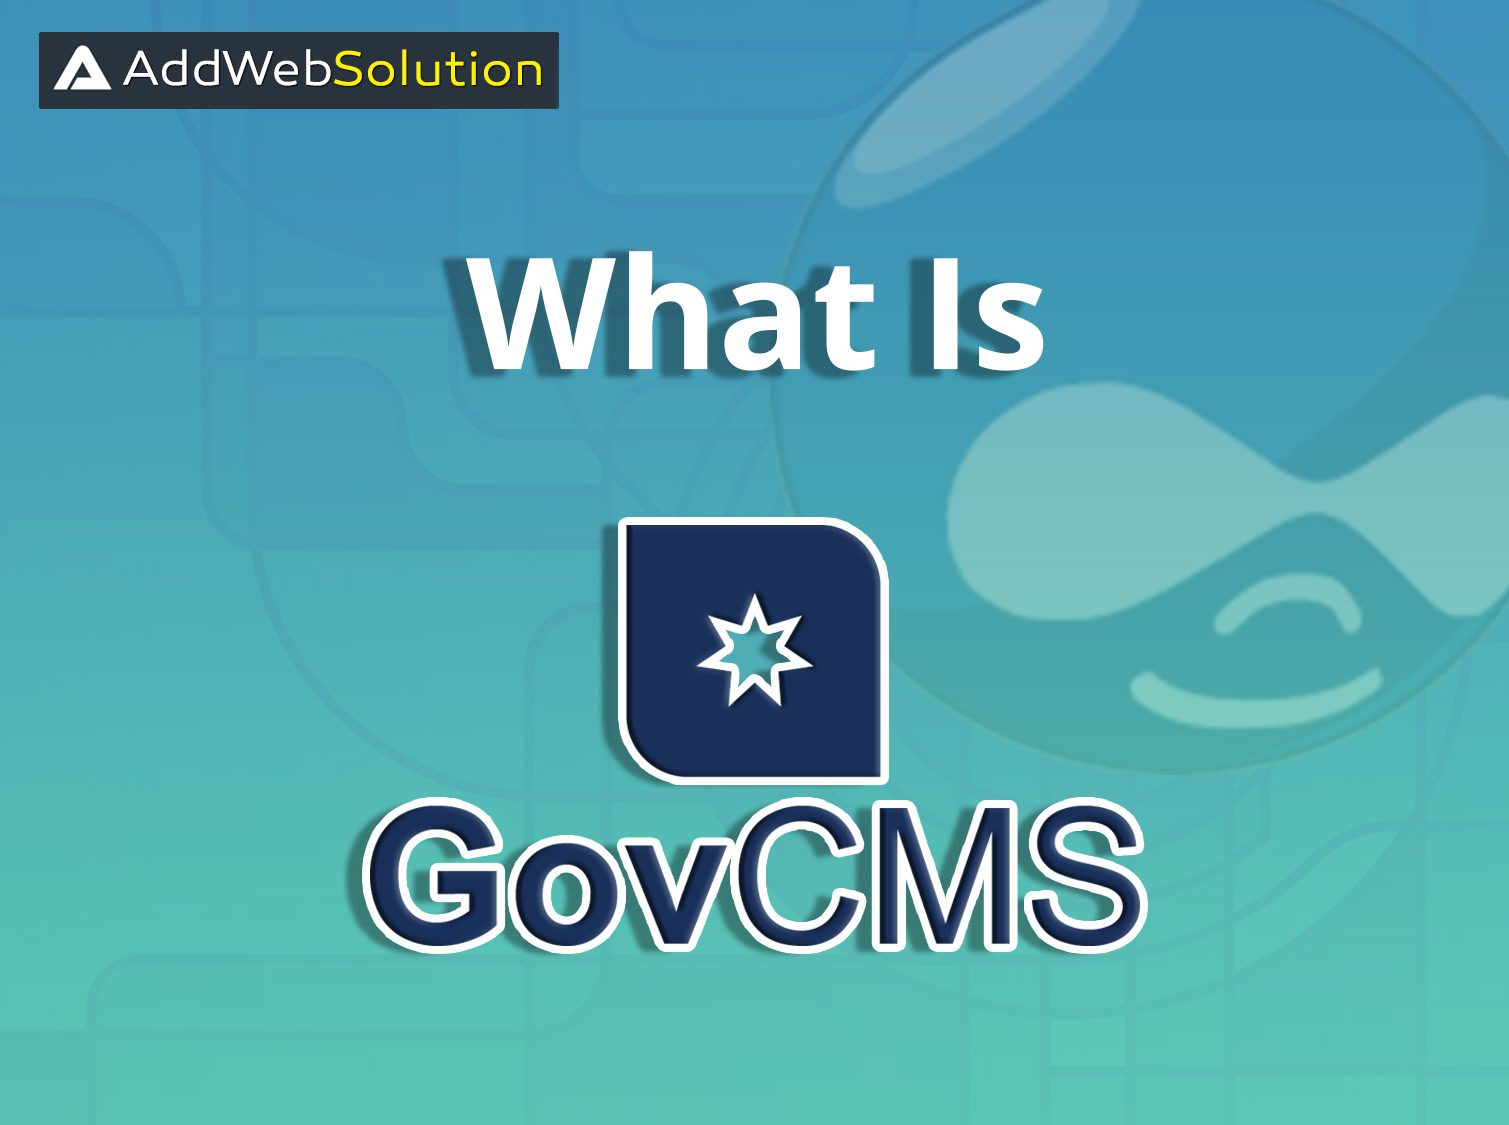 What Is GovCMS